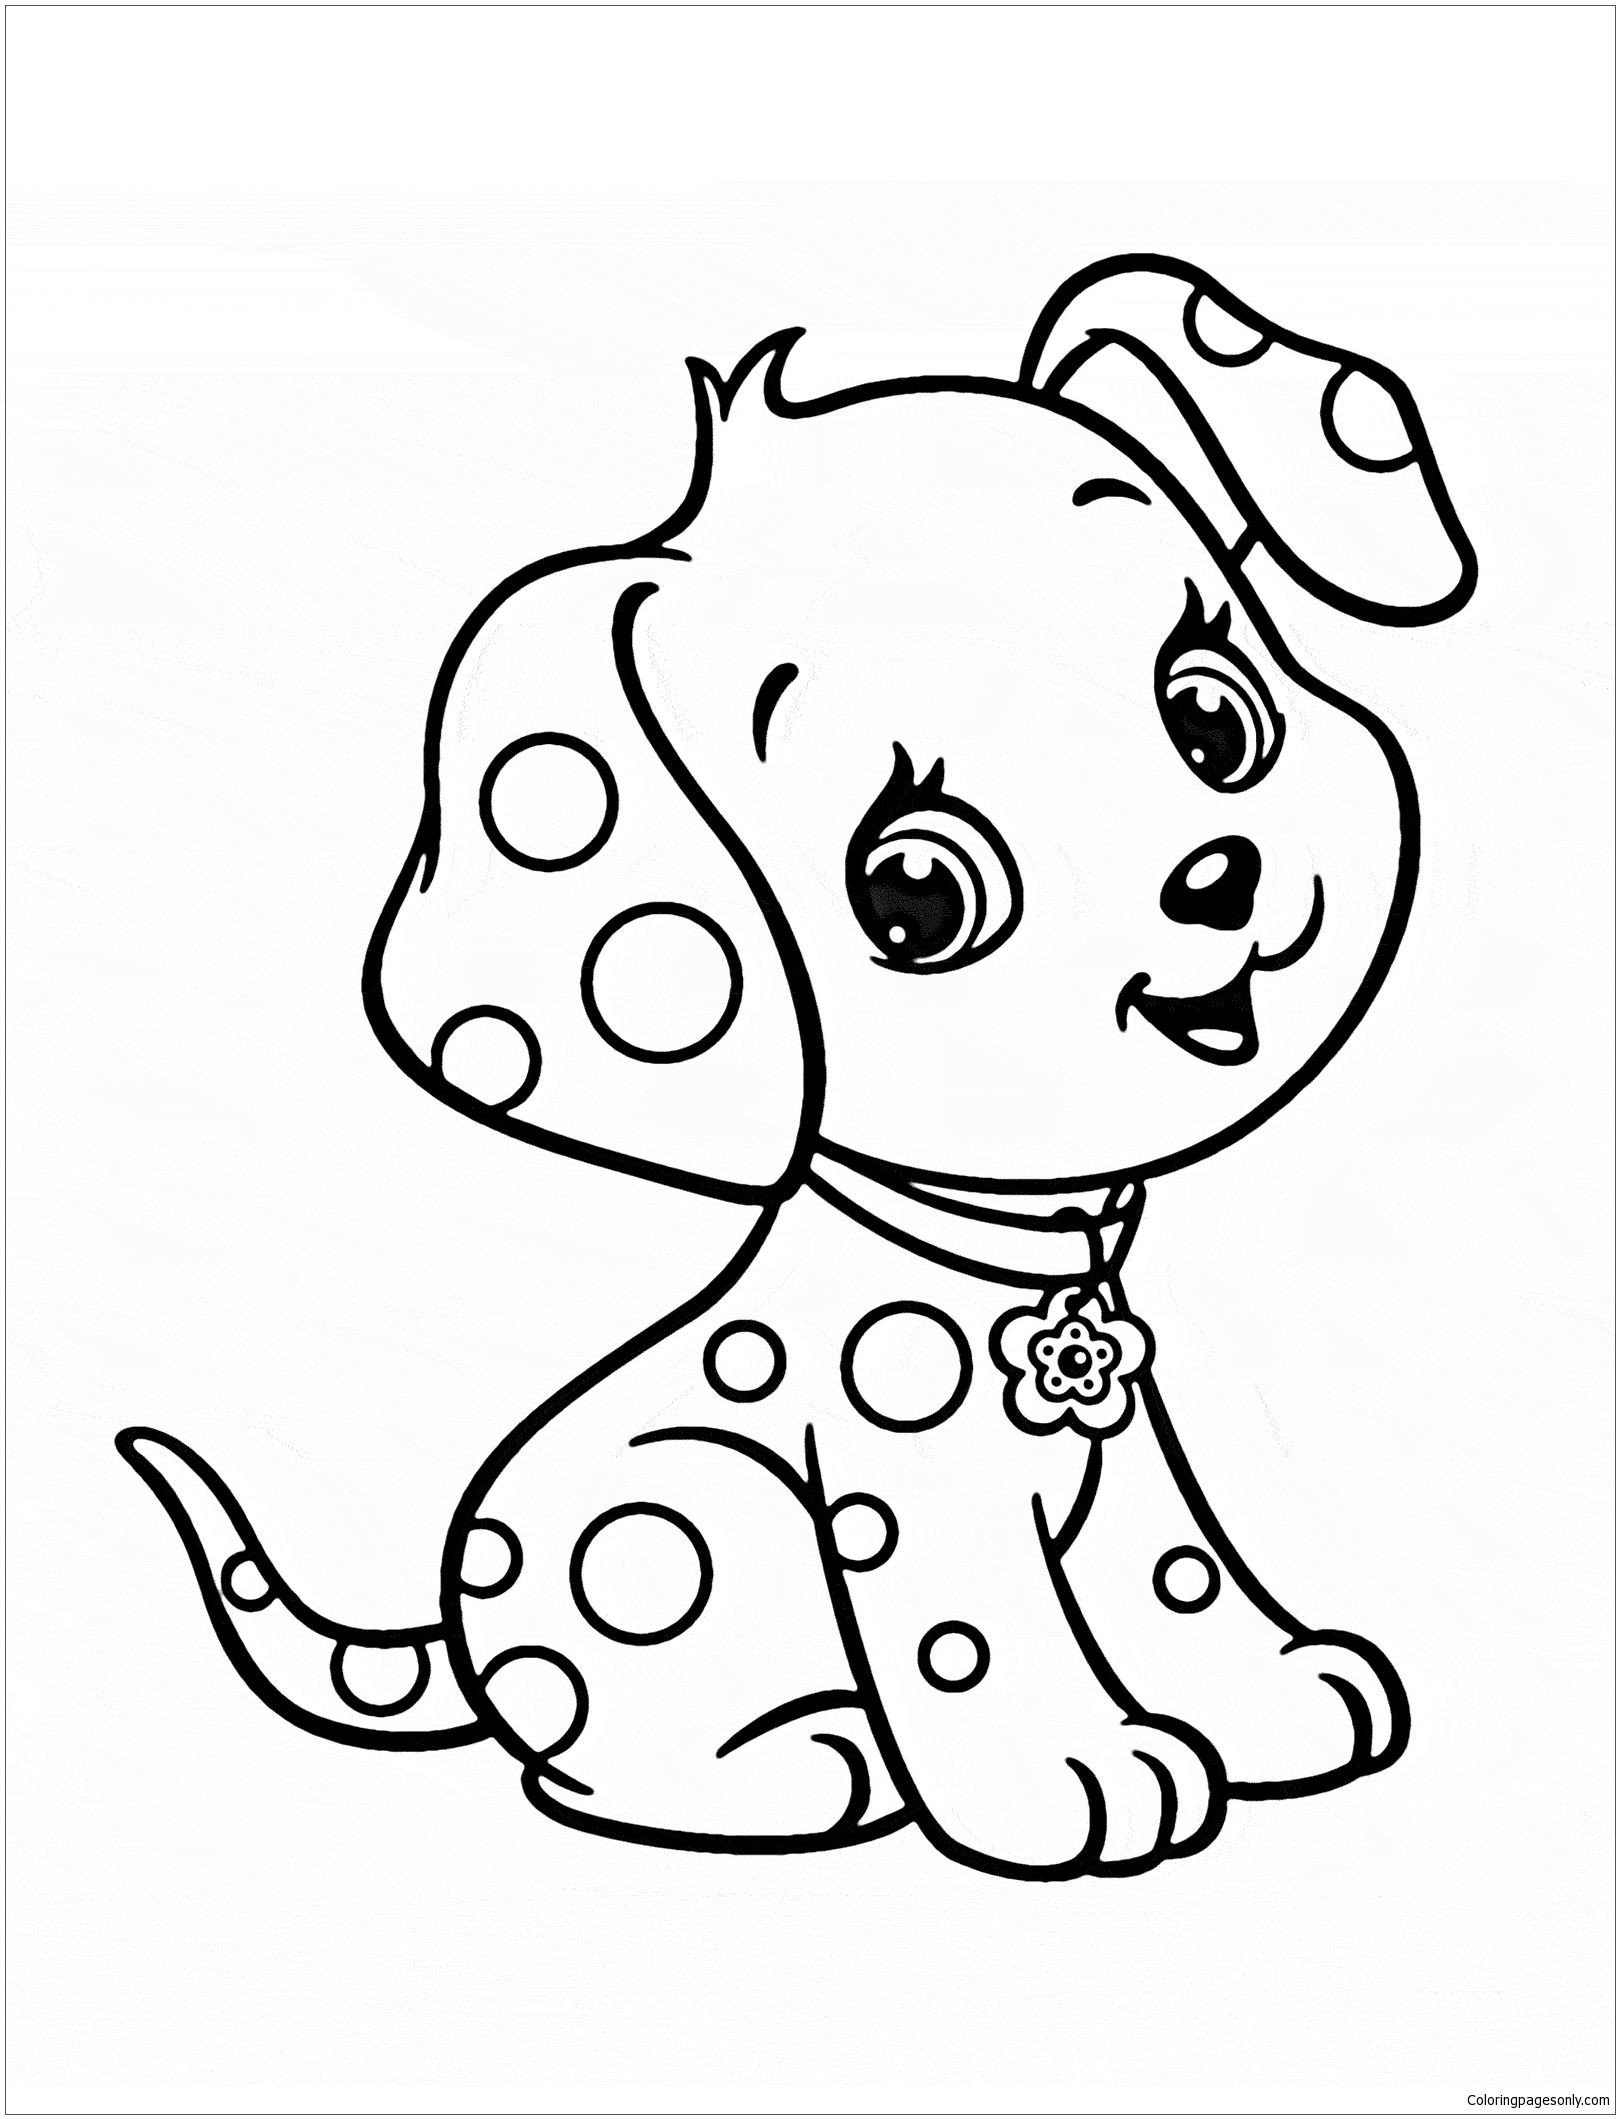 Best ideas about Cute Puppy Coloring Pages For Kids
. Save or Pin Cute Puppy 5 Coloring Page Puppy Coloring Pages Now.